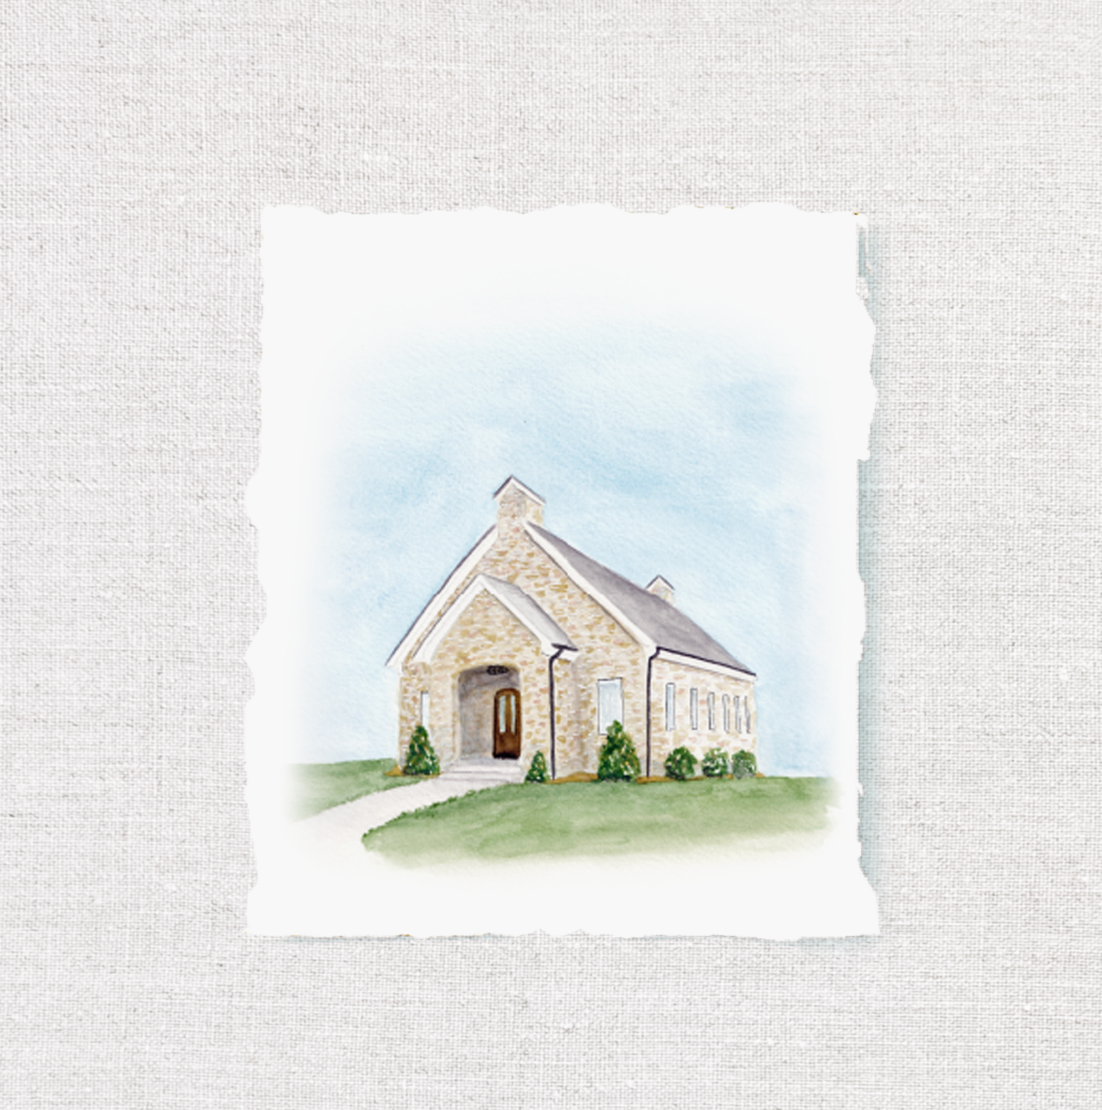 The Venue at Birchwood Chapel - Spring Hill, Tennessee ivory isle designs wedding watercolor